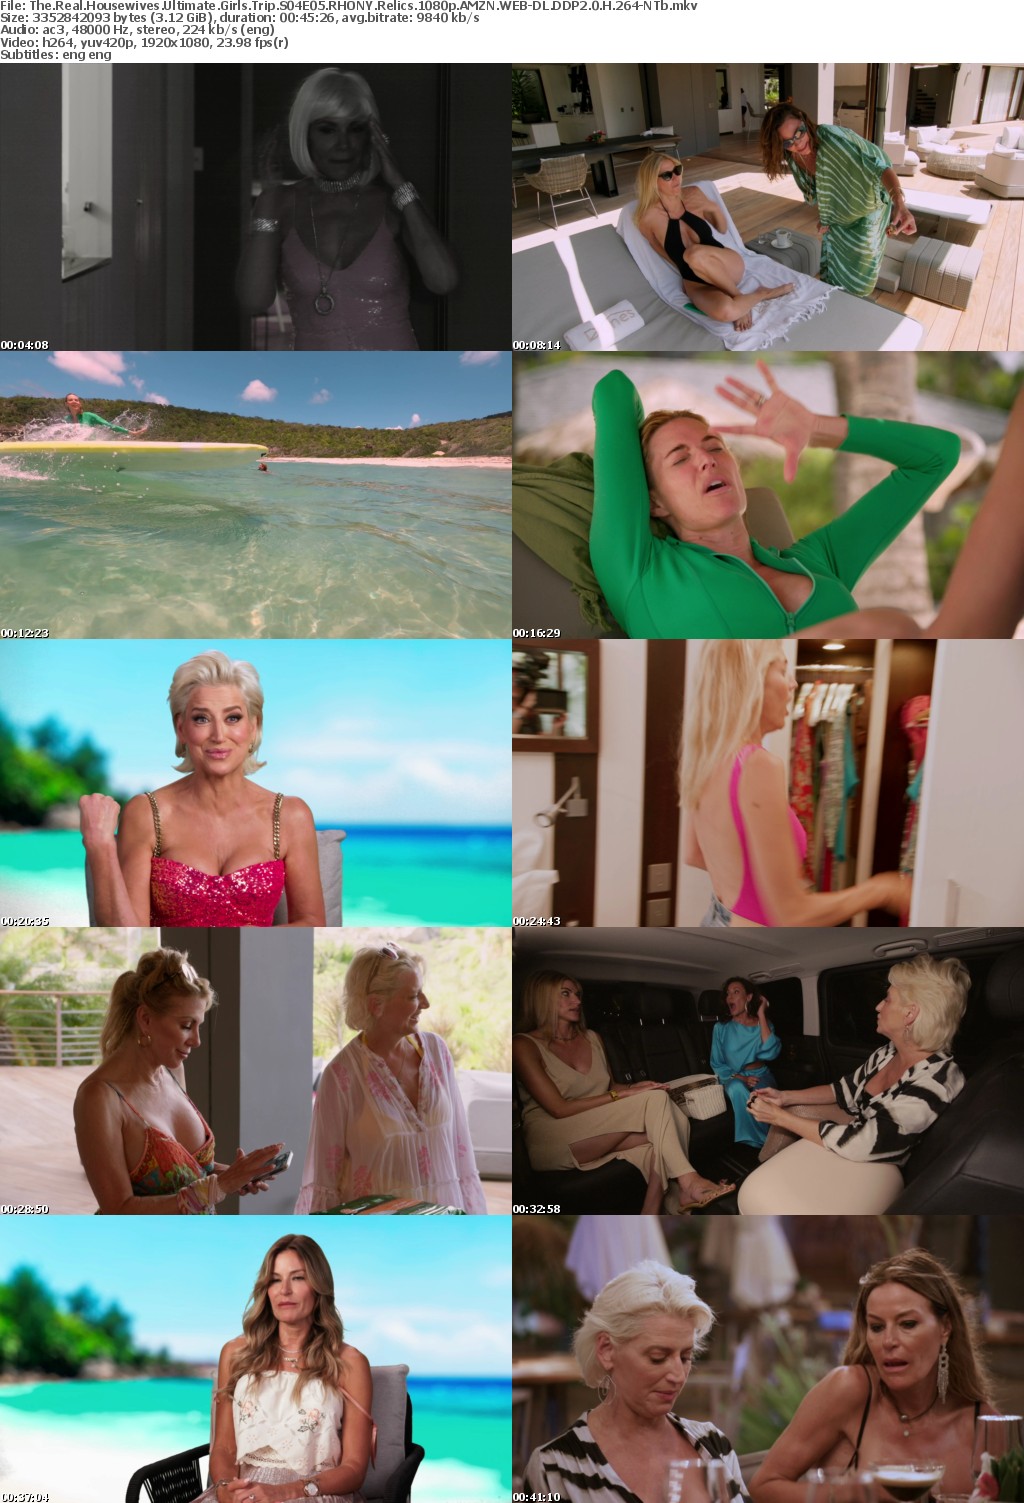 The Real Housewives Ultimate Girls Trip S04E05 RHONY Relics 1080p AMZN WEB-DL DDP2 0 H 264-NTb